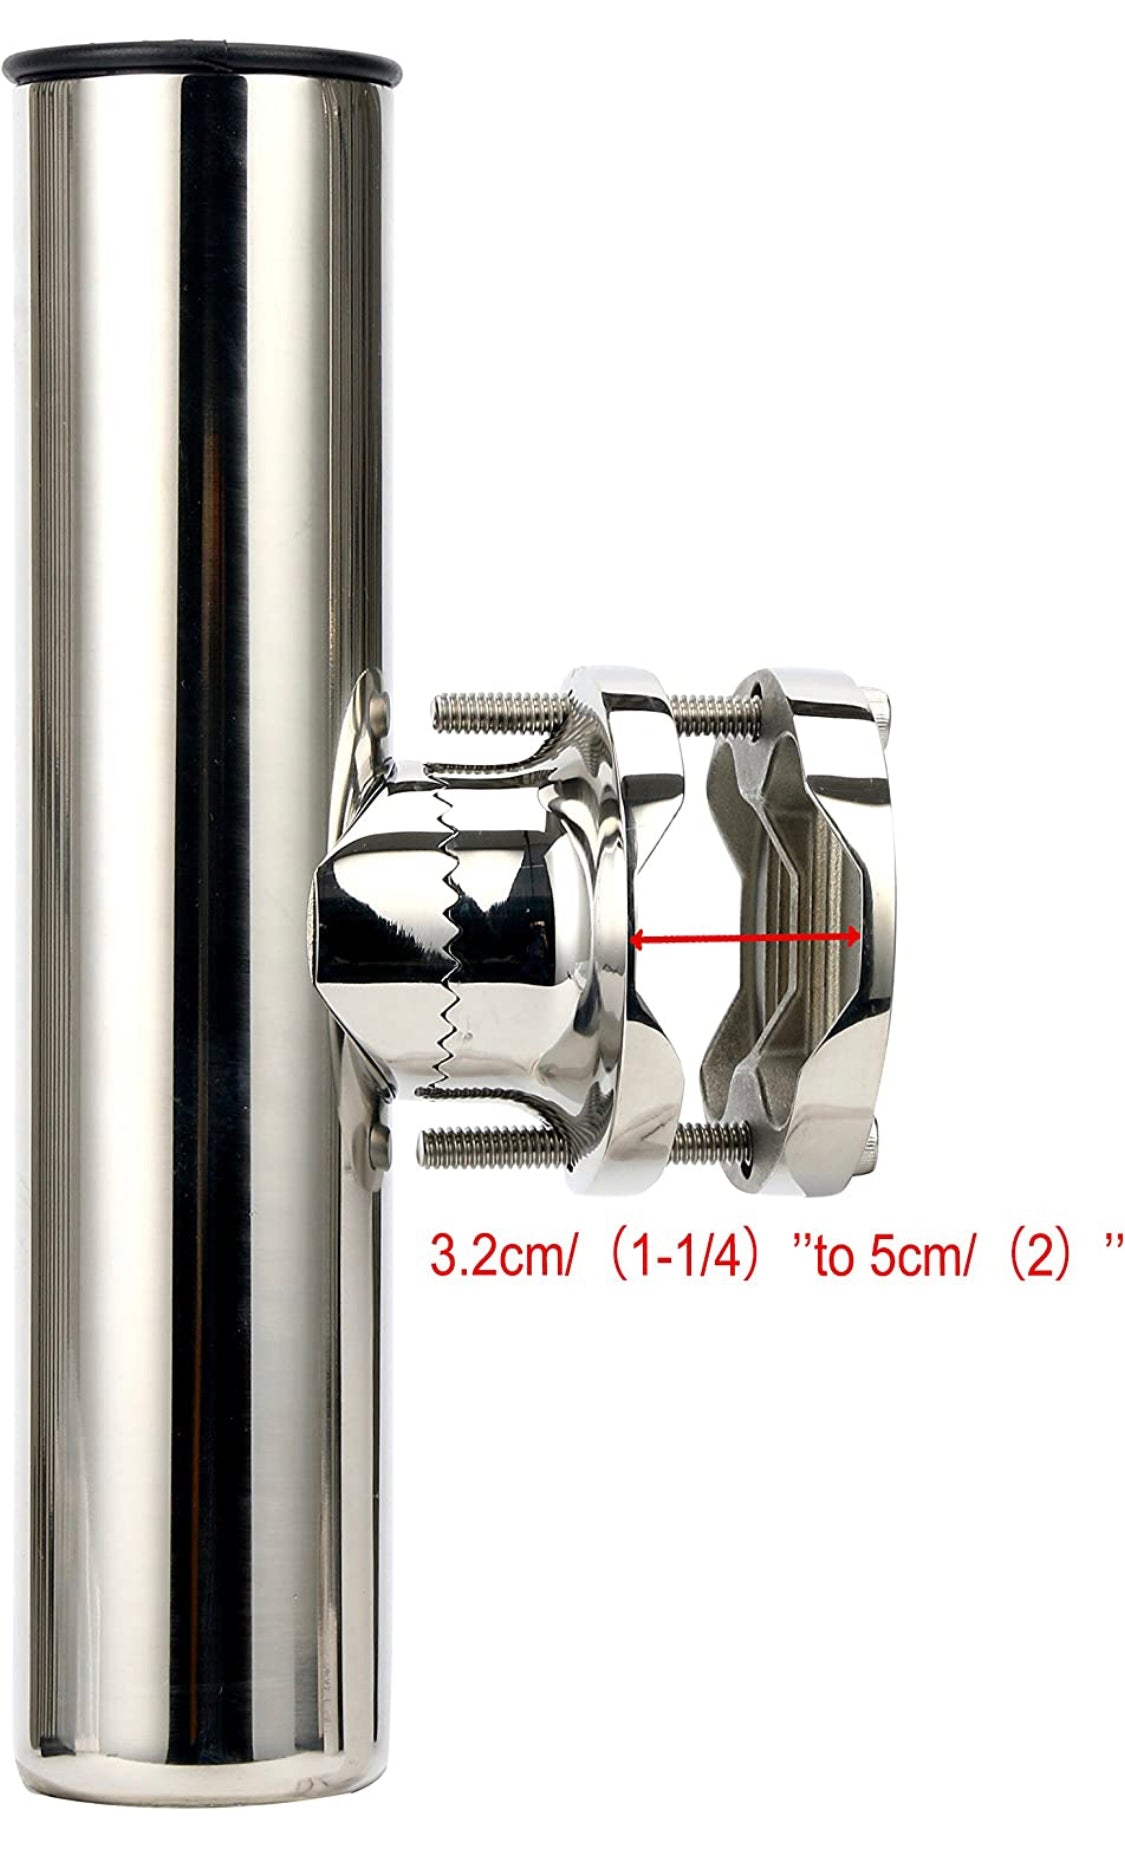 Amarine Made (2x) Stainless Rail Mount Clamp on Fishing Rod Holder for Rails 1-1/4" to 2"